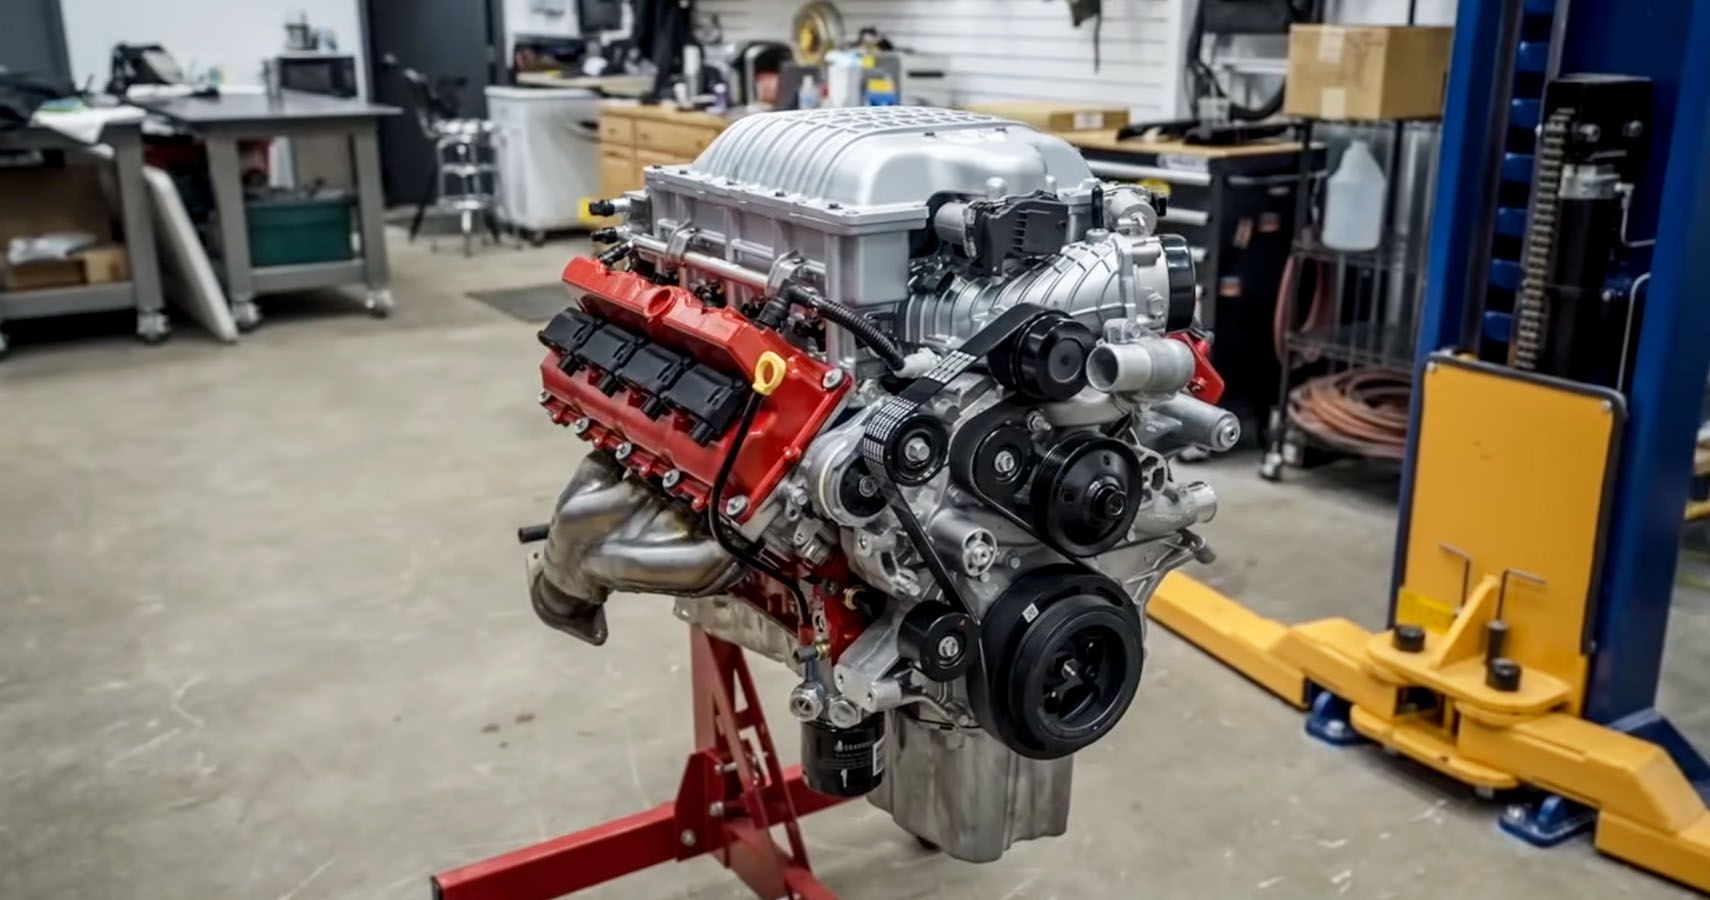 Watch This Complete Dodge Demon Engine Build Sped Up Is So Satisfying